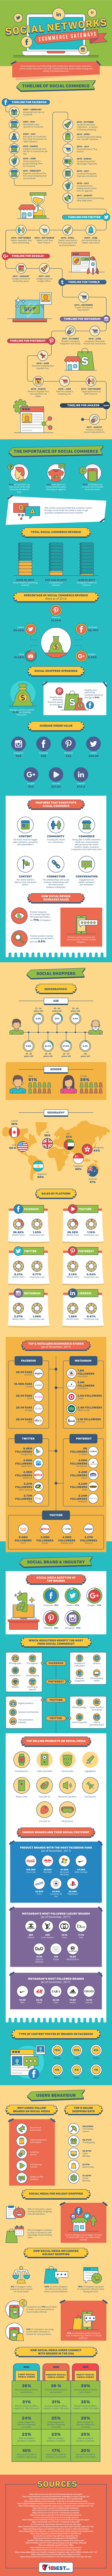 2018 infographic social commerce 2018